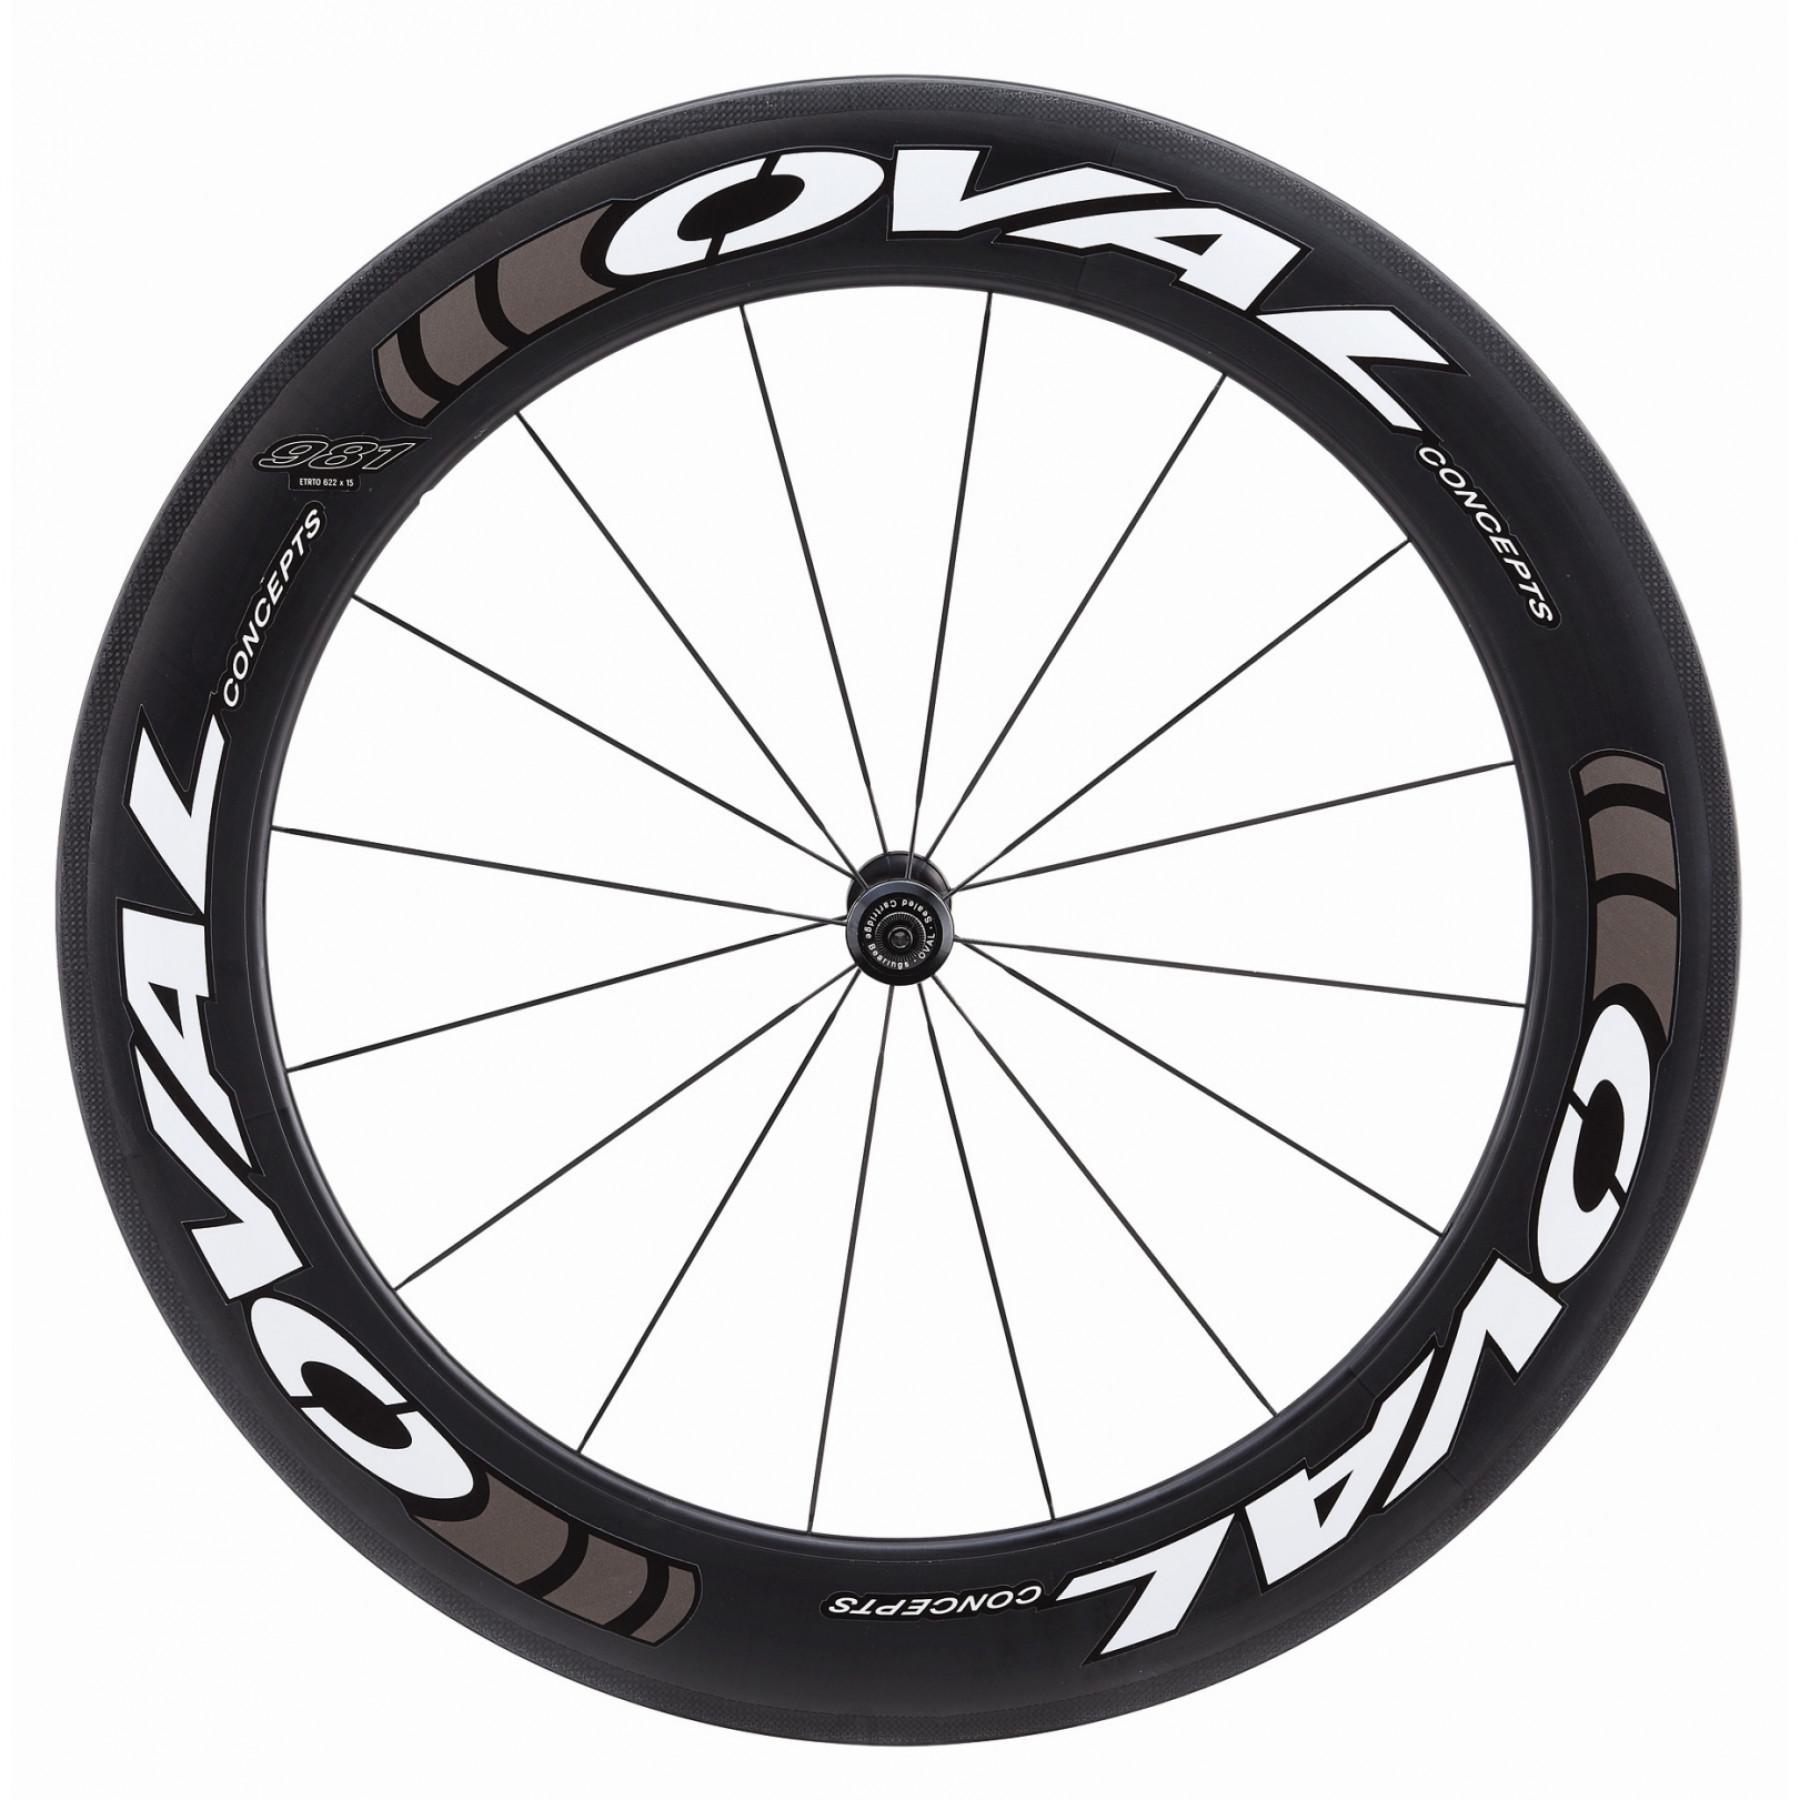 Rim Oval concepts Oval 980 Carbon Track 2017